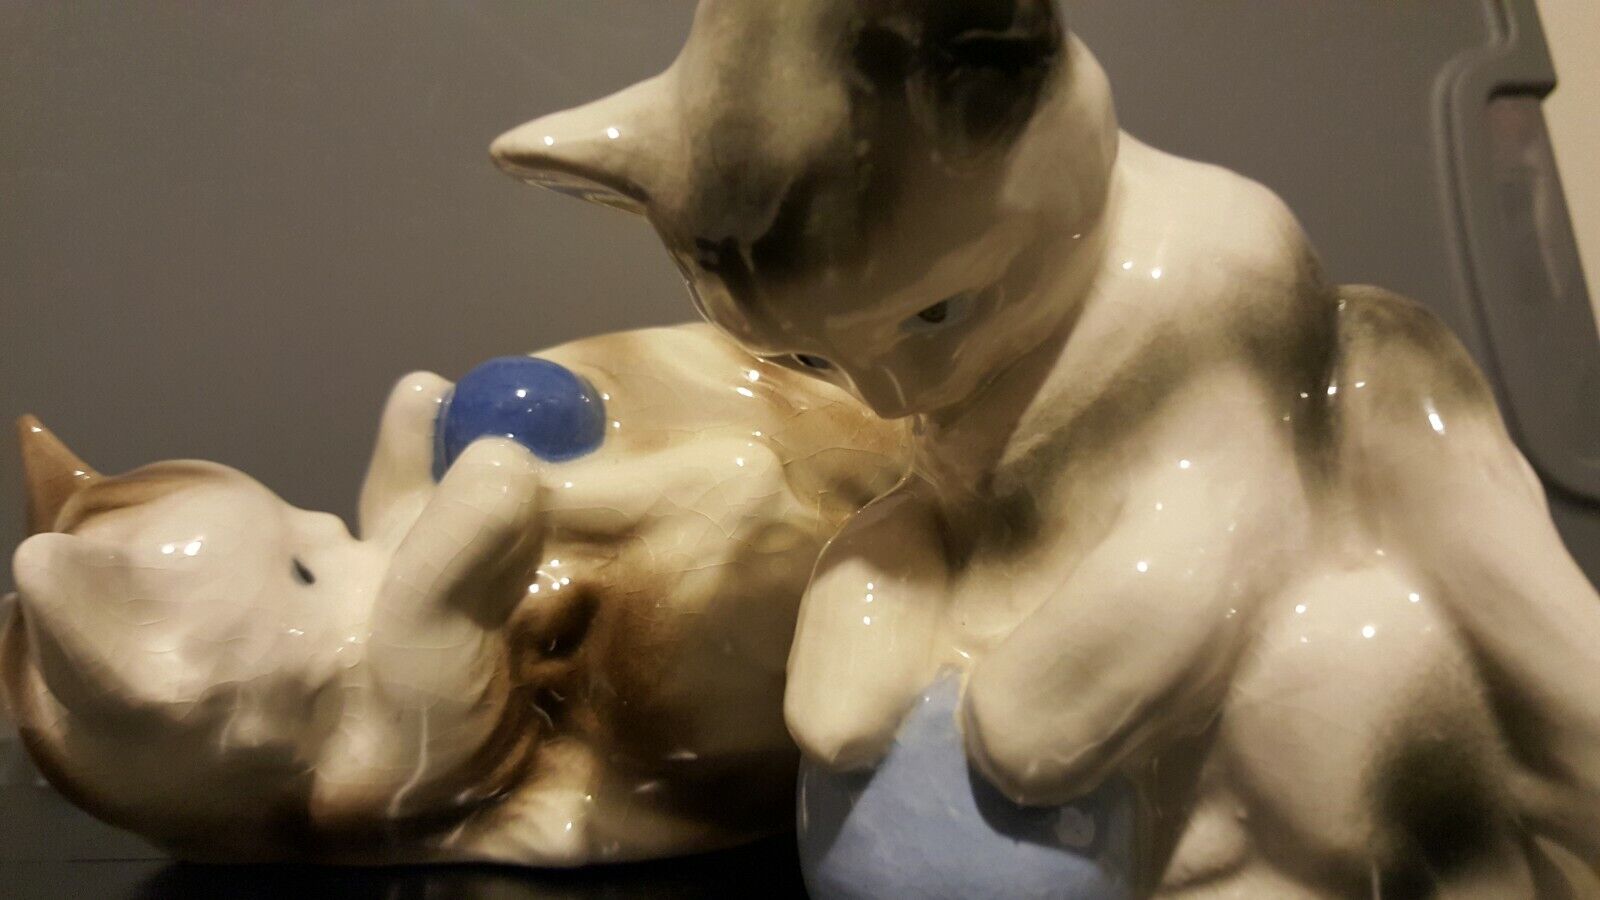 Walter Walier Williams Sculptor Cats with Blue Ball SIGNED ON BOTTOM